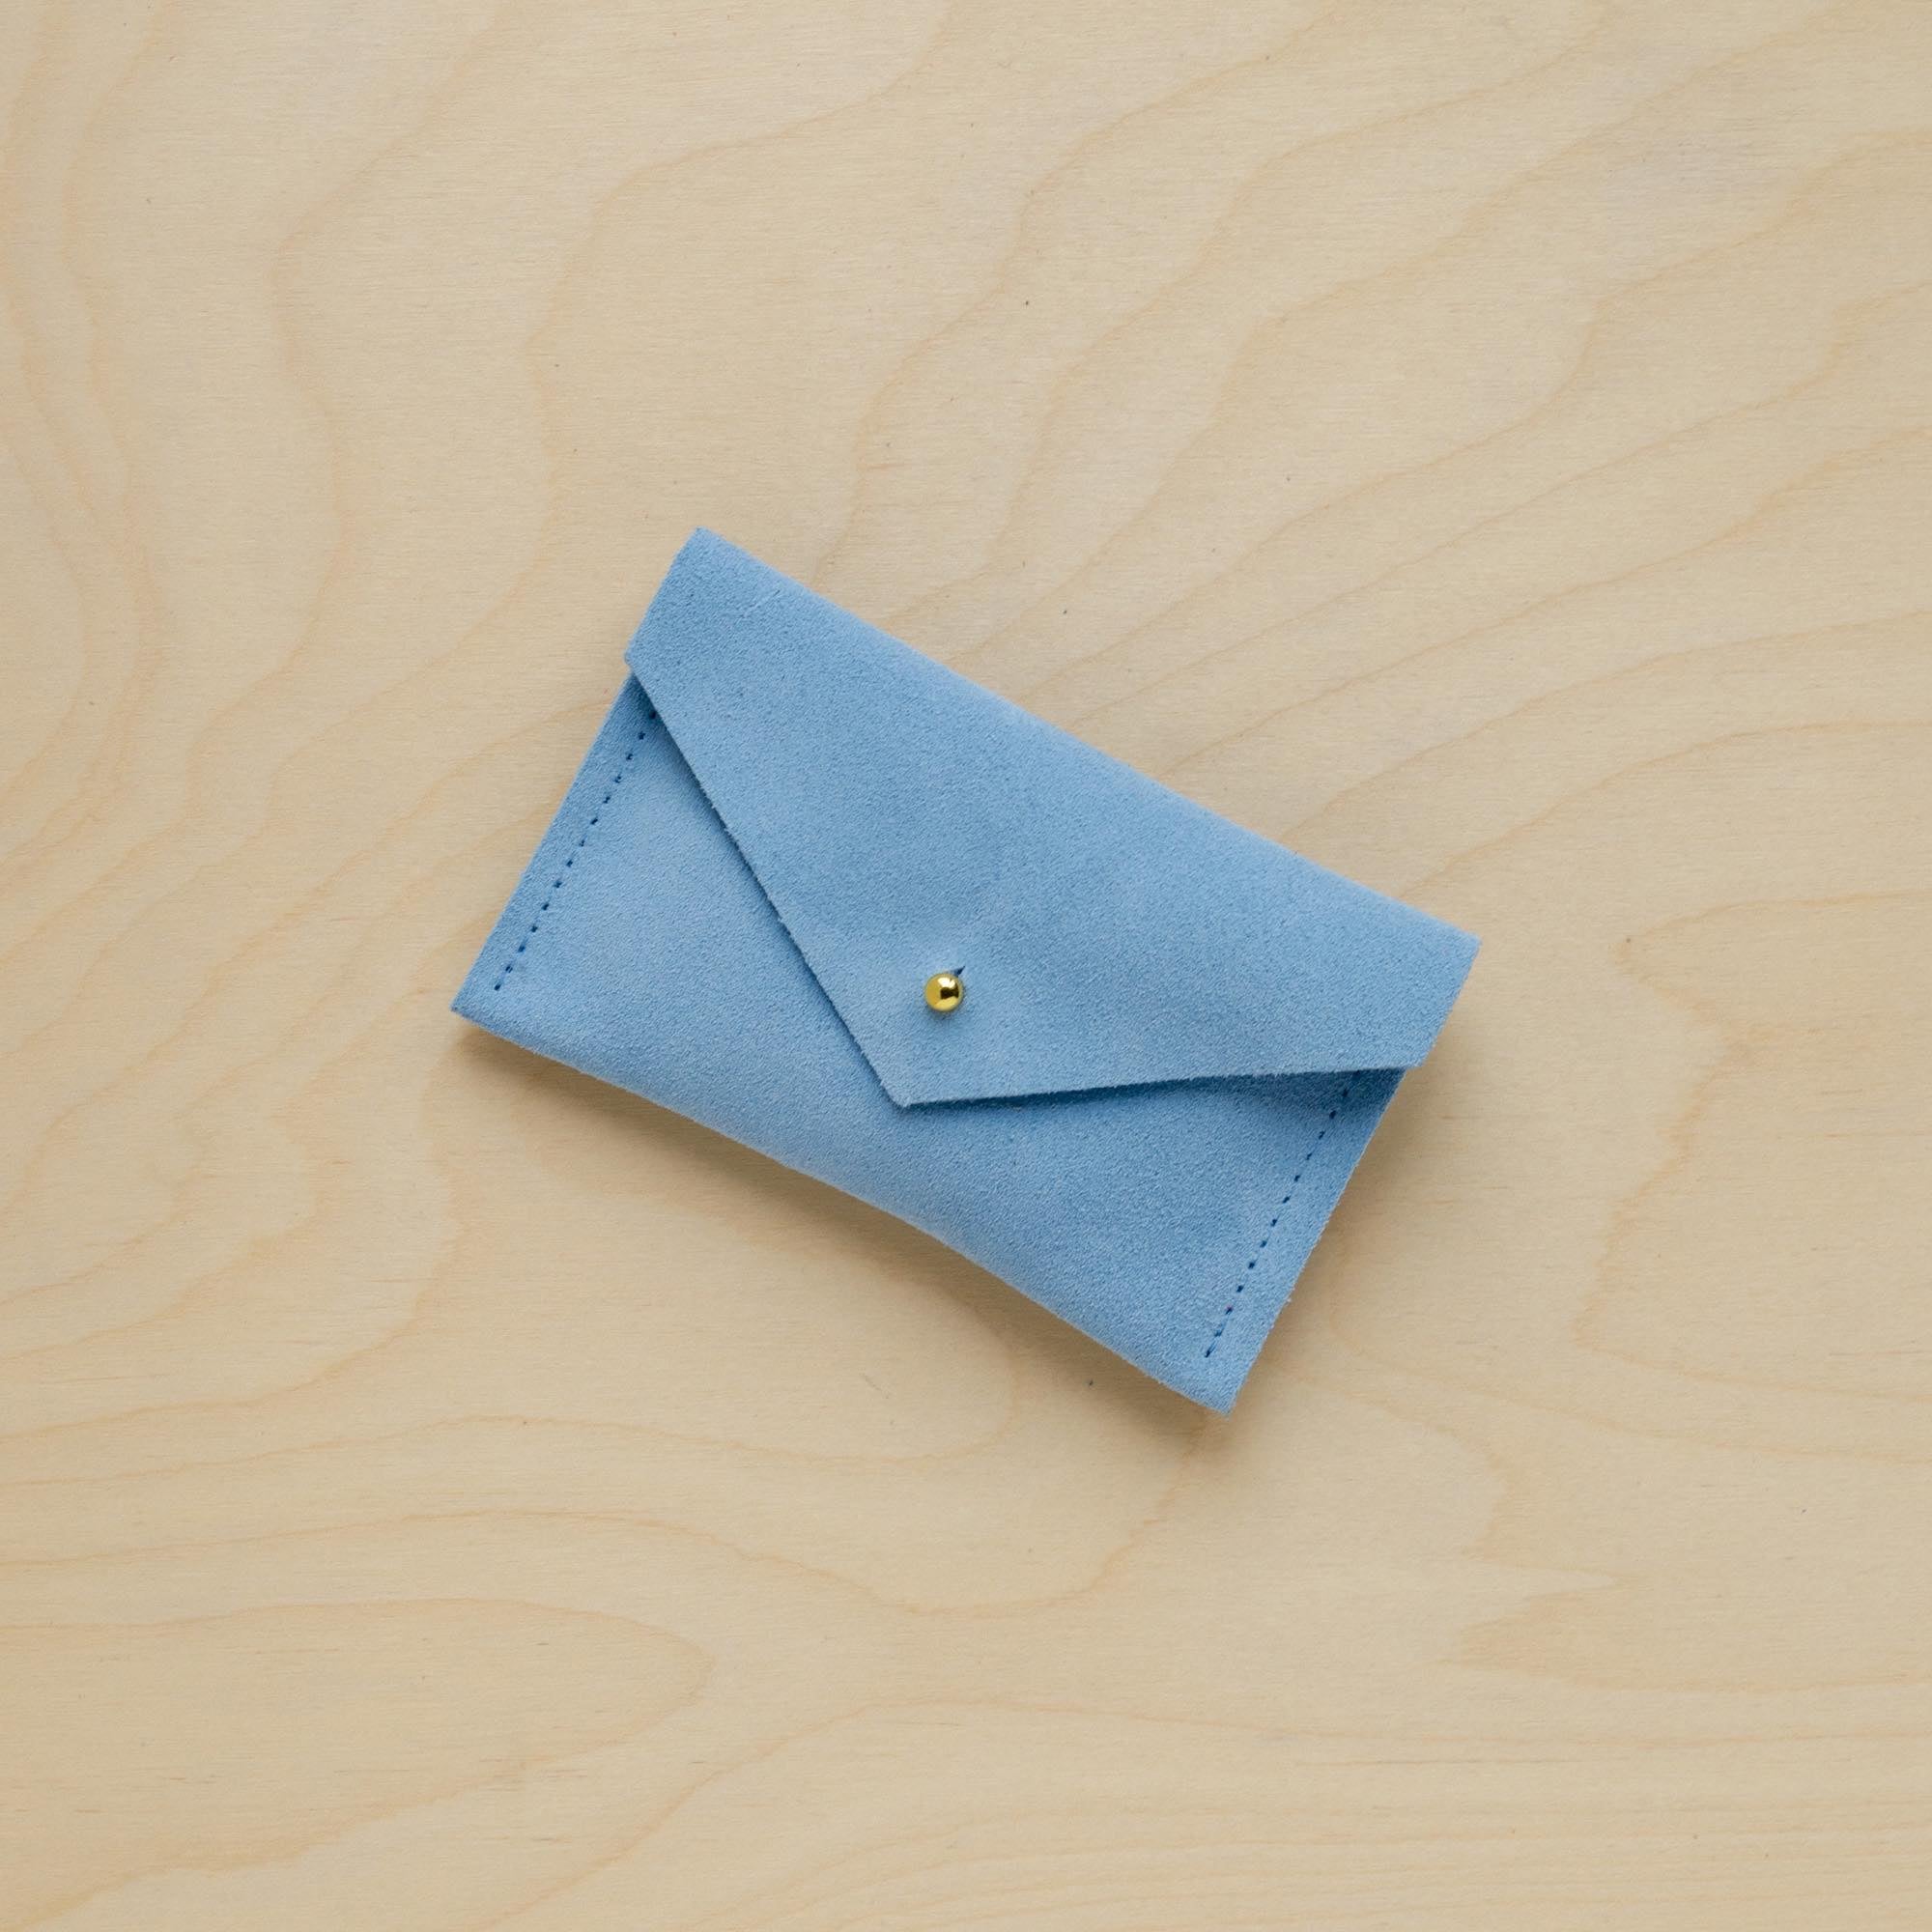 A suede Small Notions Pouch in Pale Blue. Complete with a stud for secure closing.